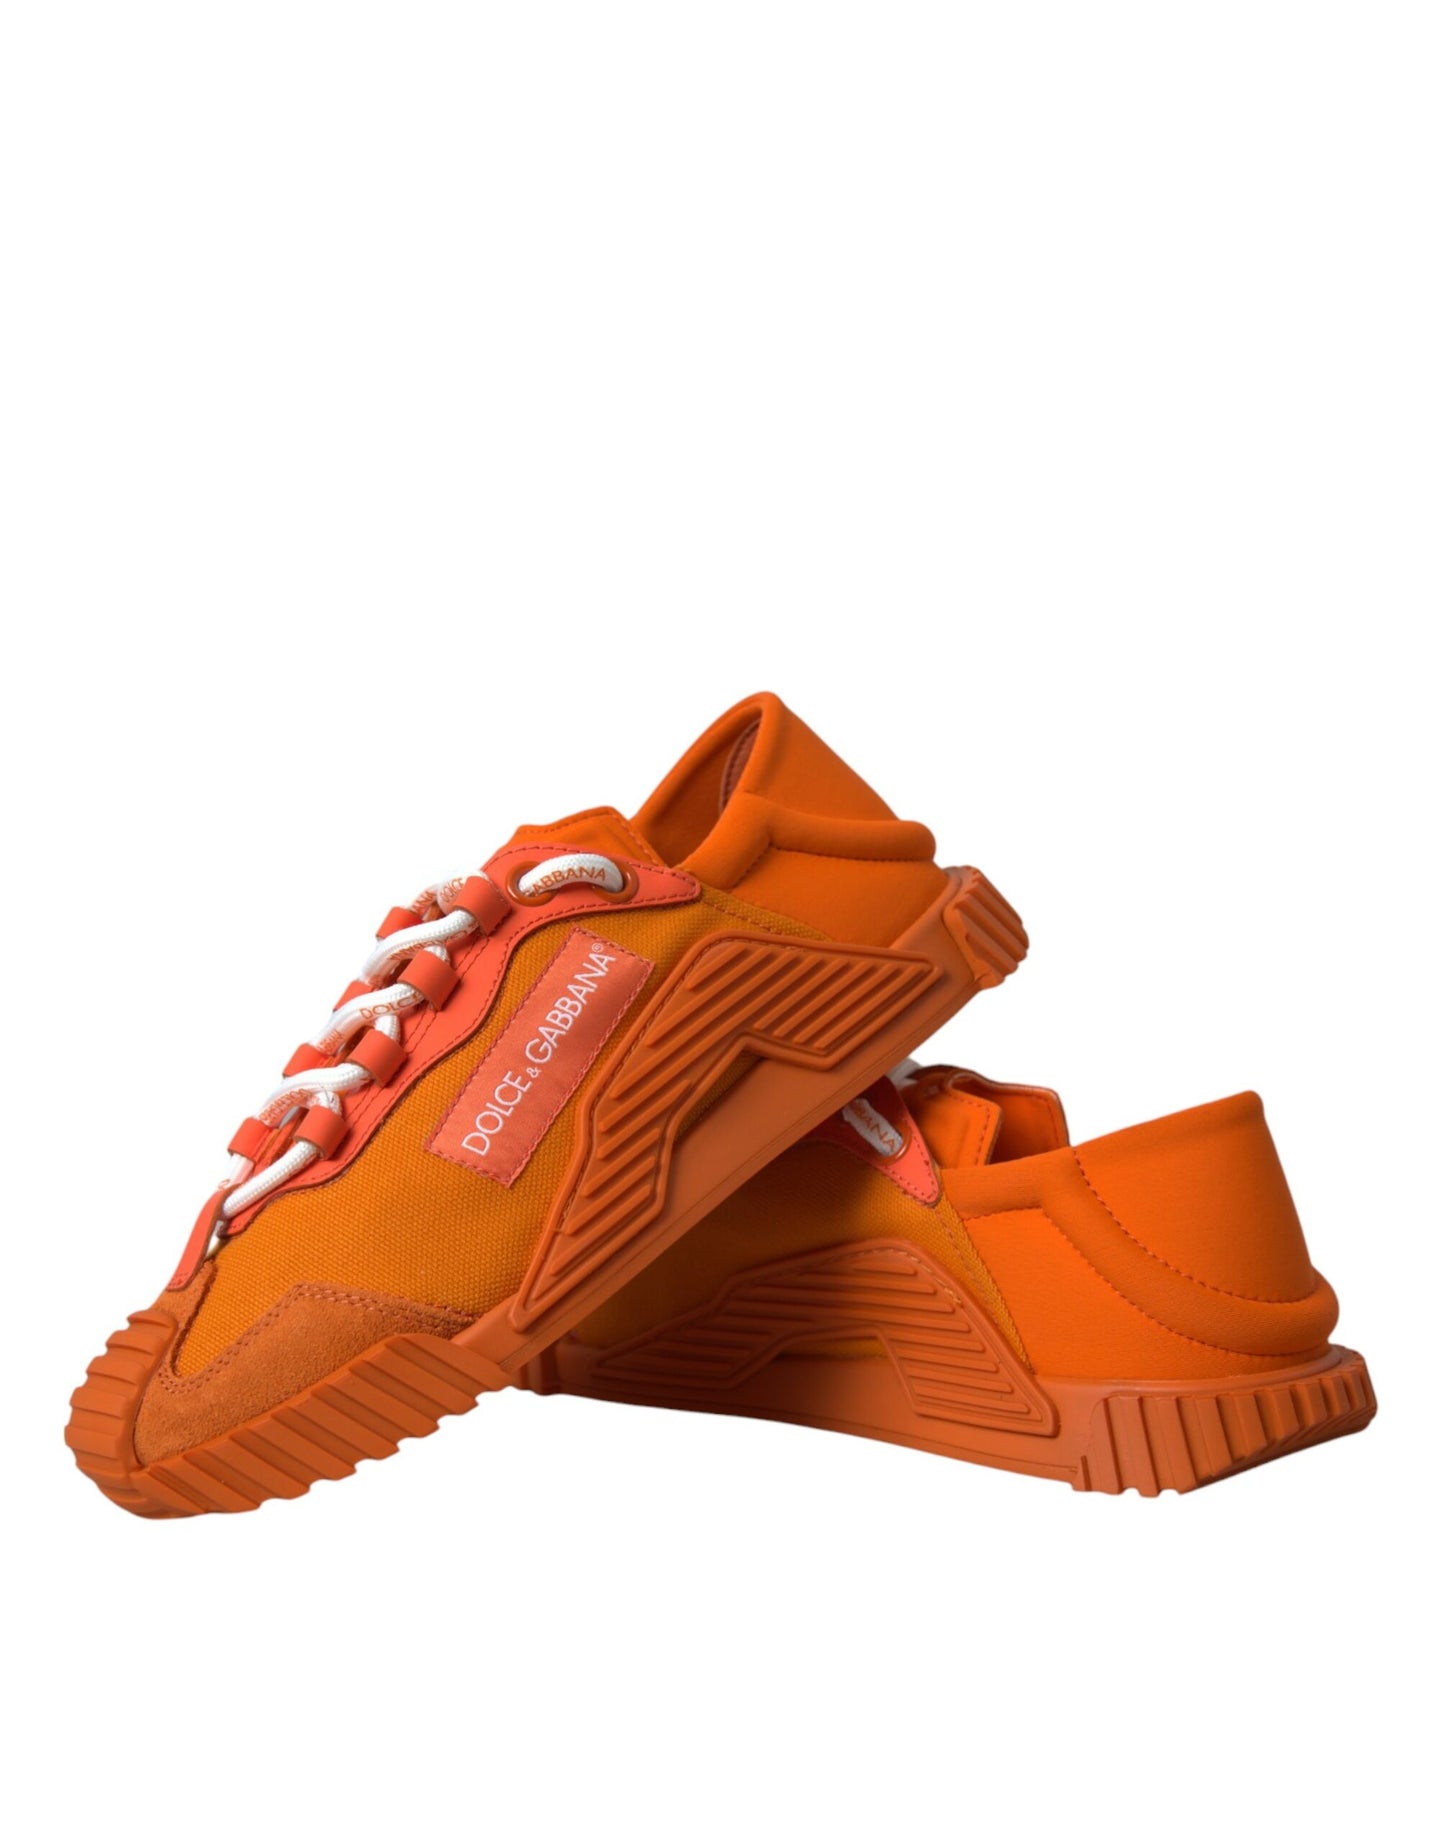 Dolce & Gabbana Orange NS1 Low Top Sports Sneakers Shoes